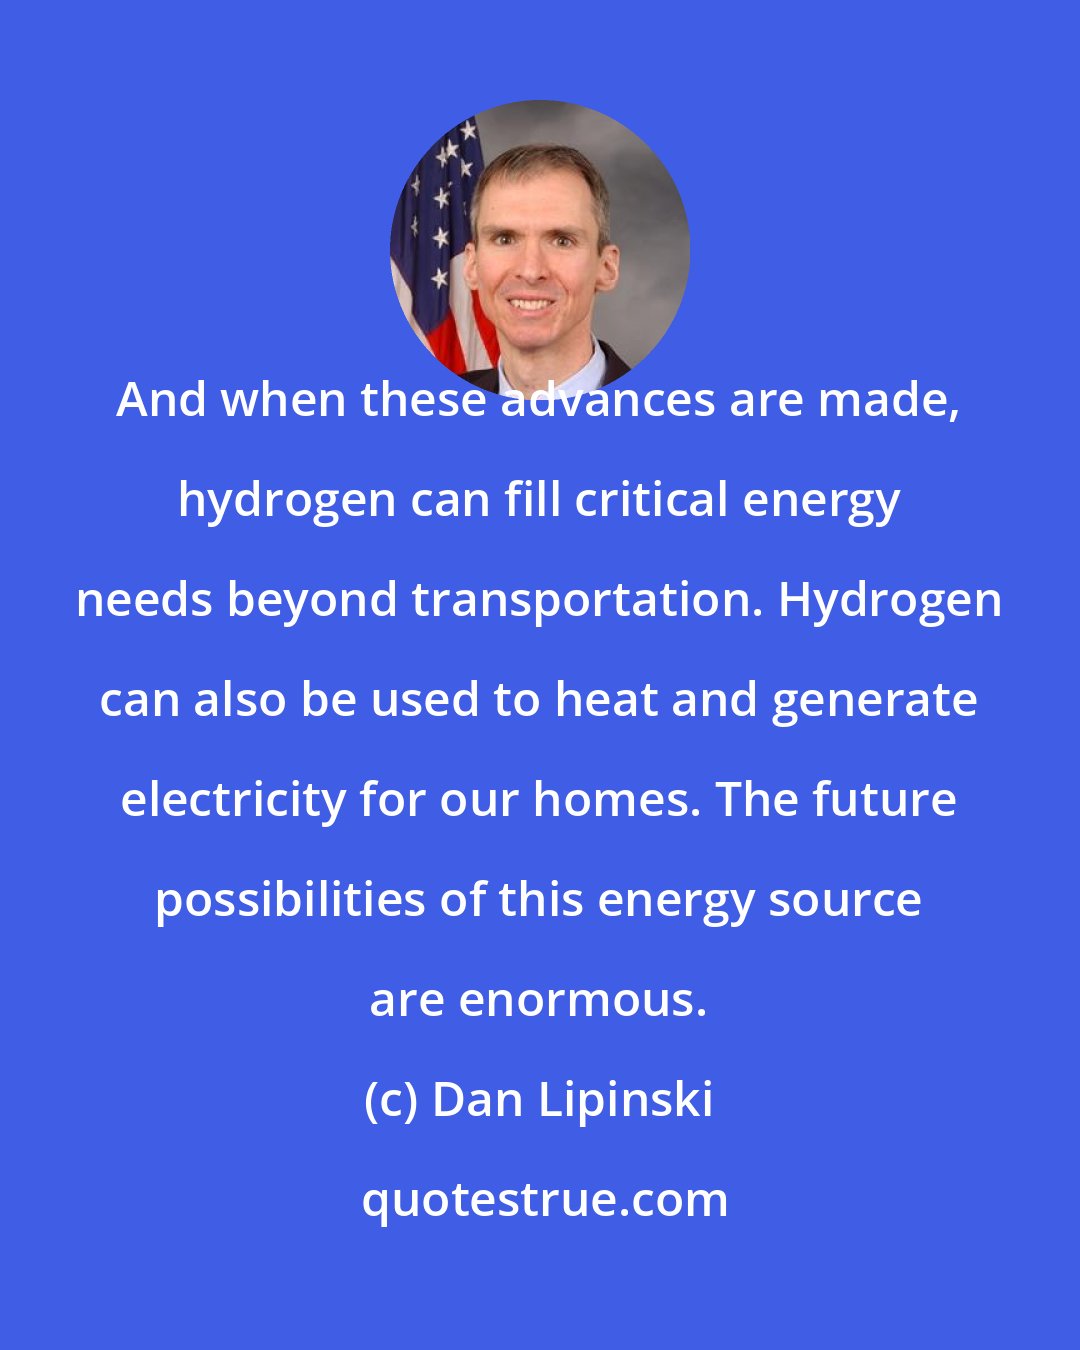 Dan Lipinski: And when these advances are made, hydrogen can fill critical energy needs beyond transportation. Hydrogen can also be used to heat and generate electricity for our homes. The future possibilities of this energy source are enormous.